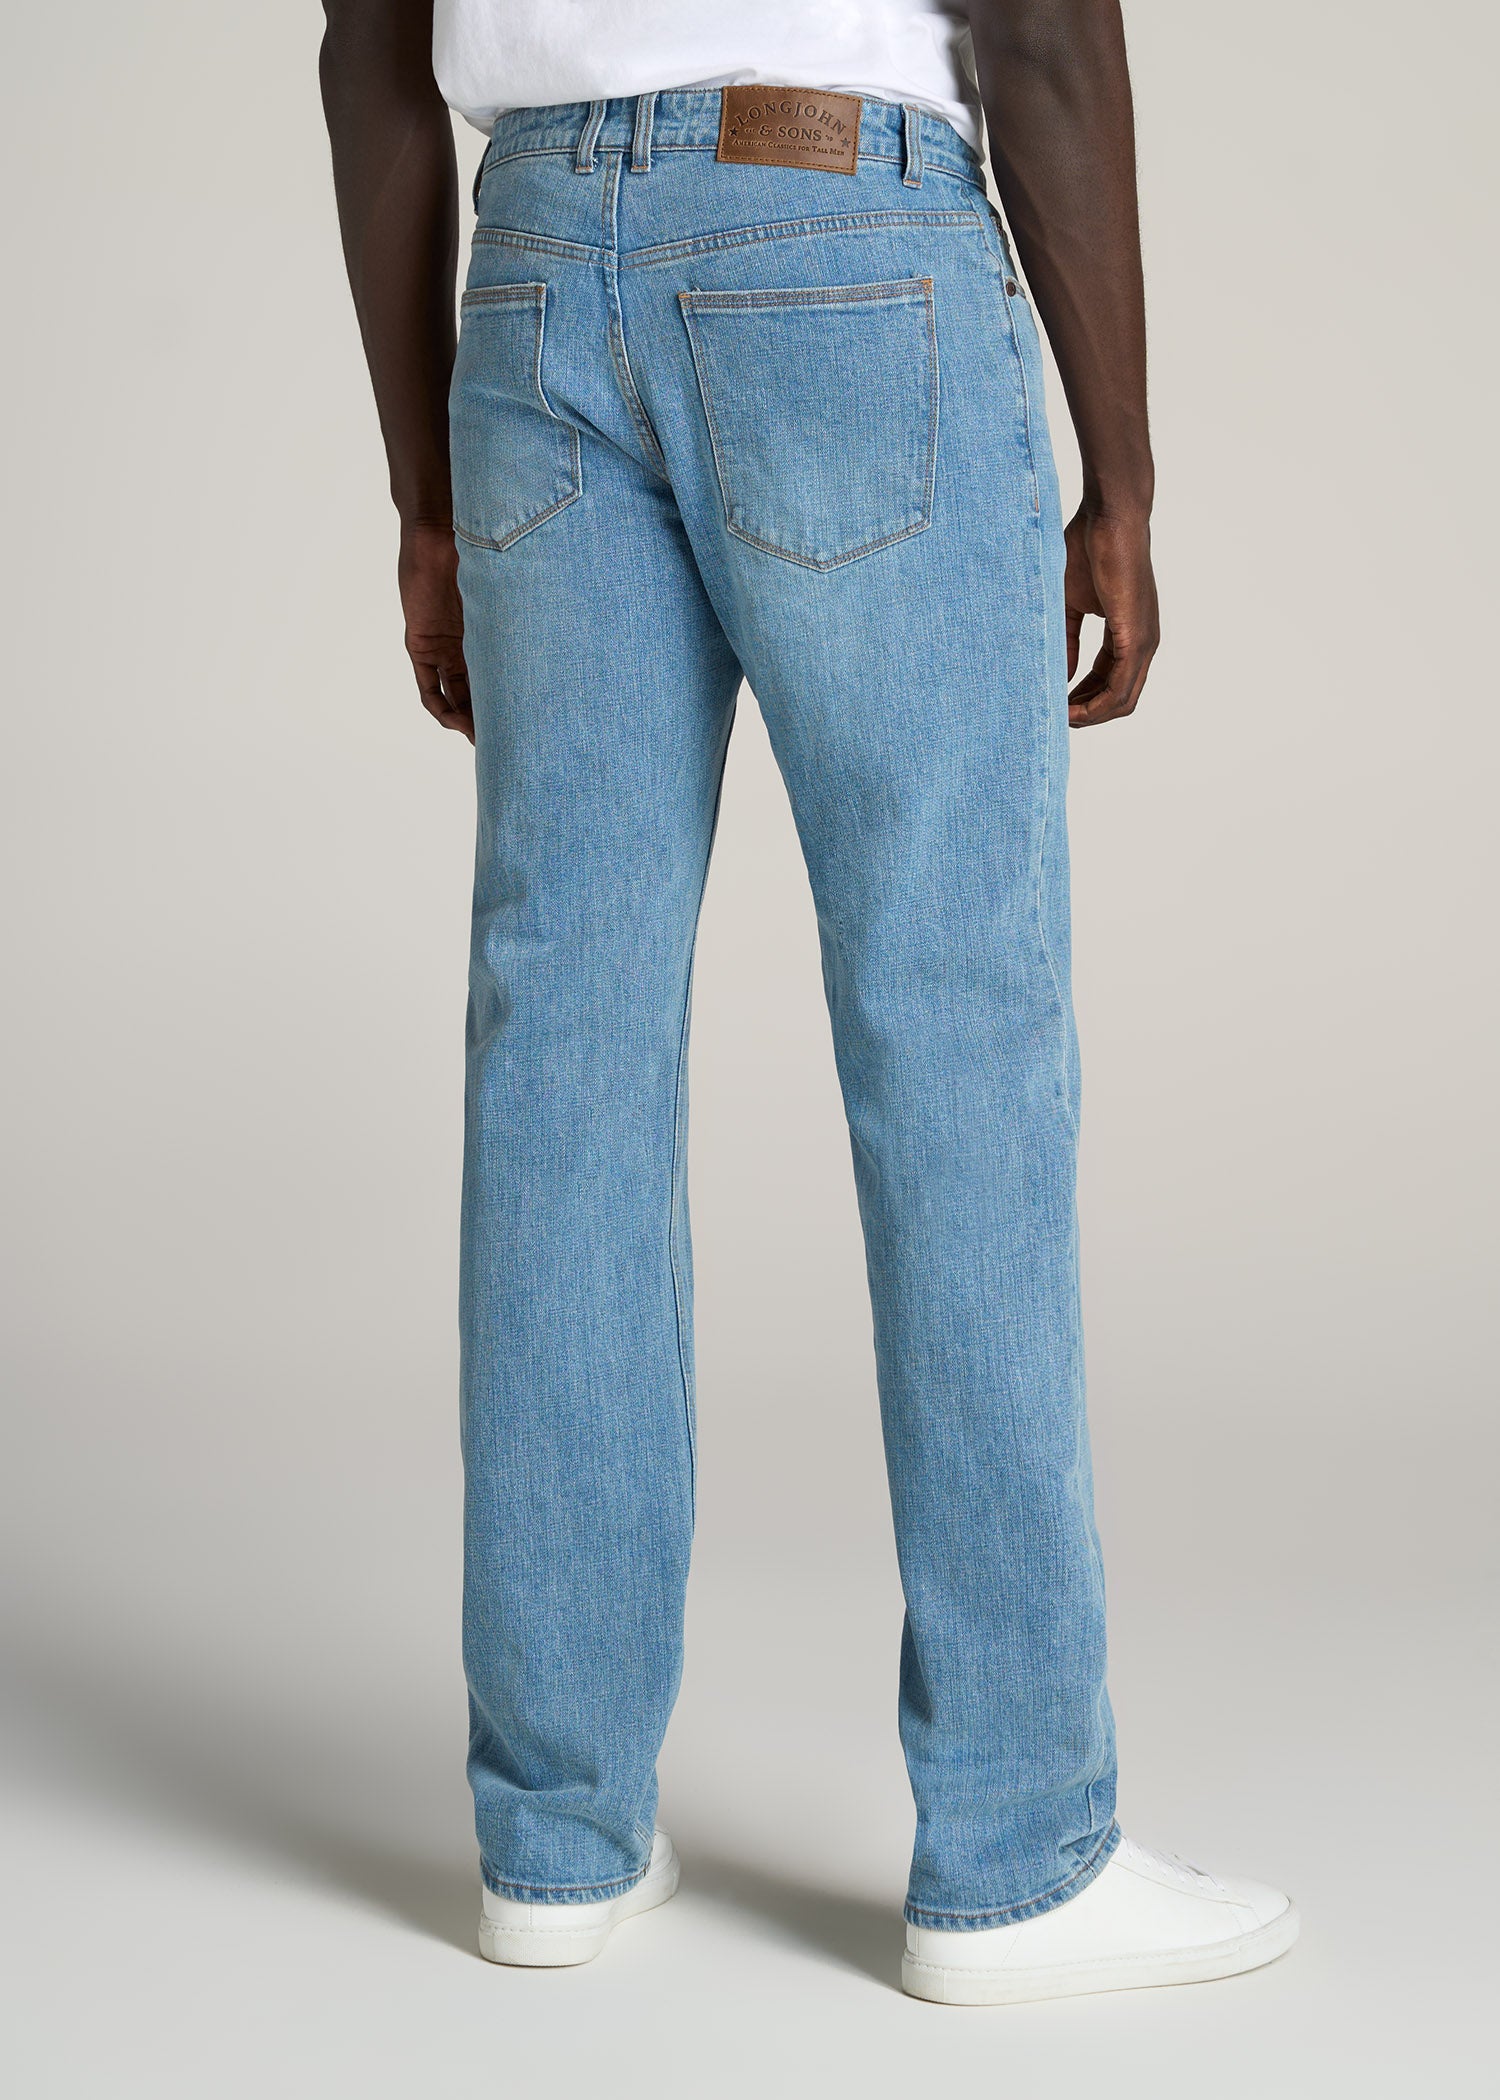 LJ&S STRAIGHT LEG Jeans for Tall Men in Heritage Faded